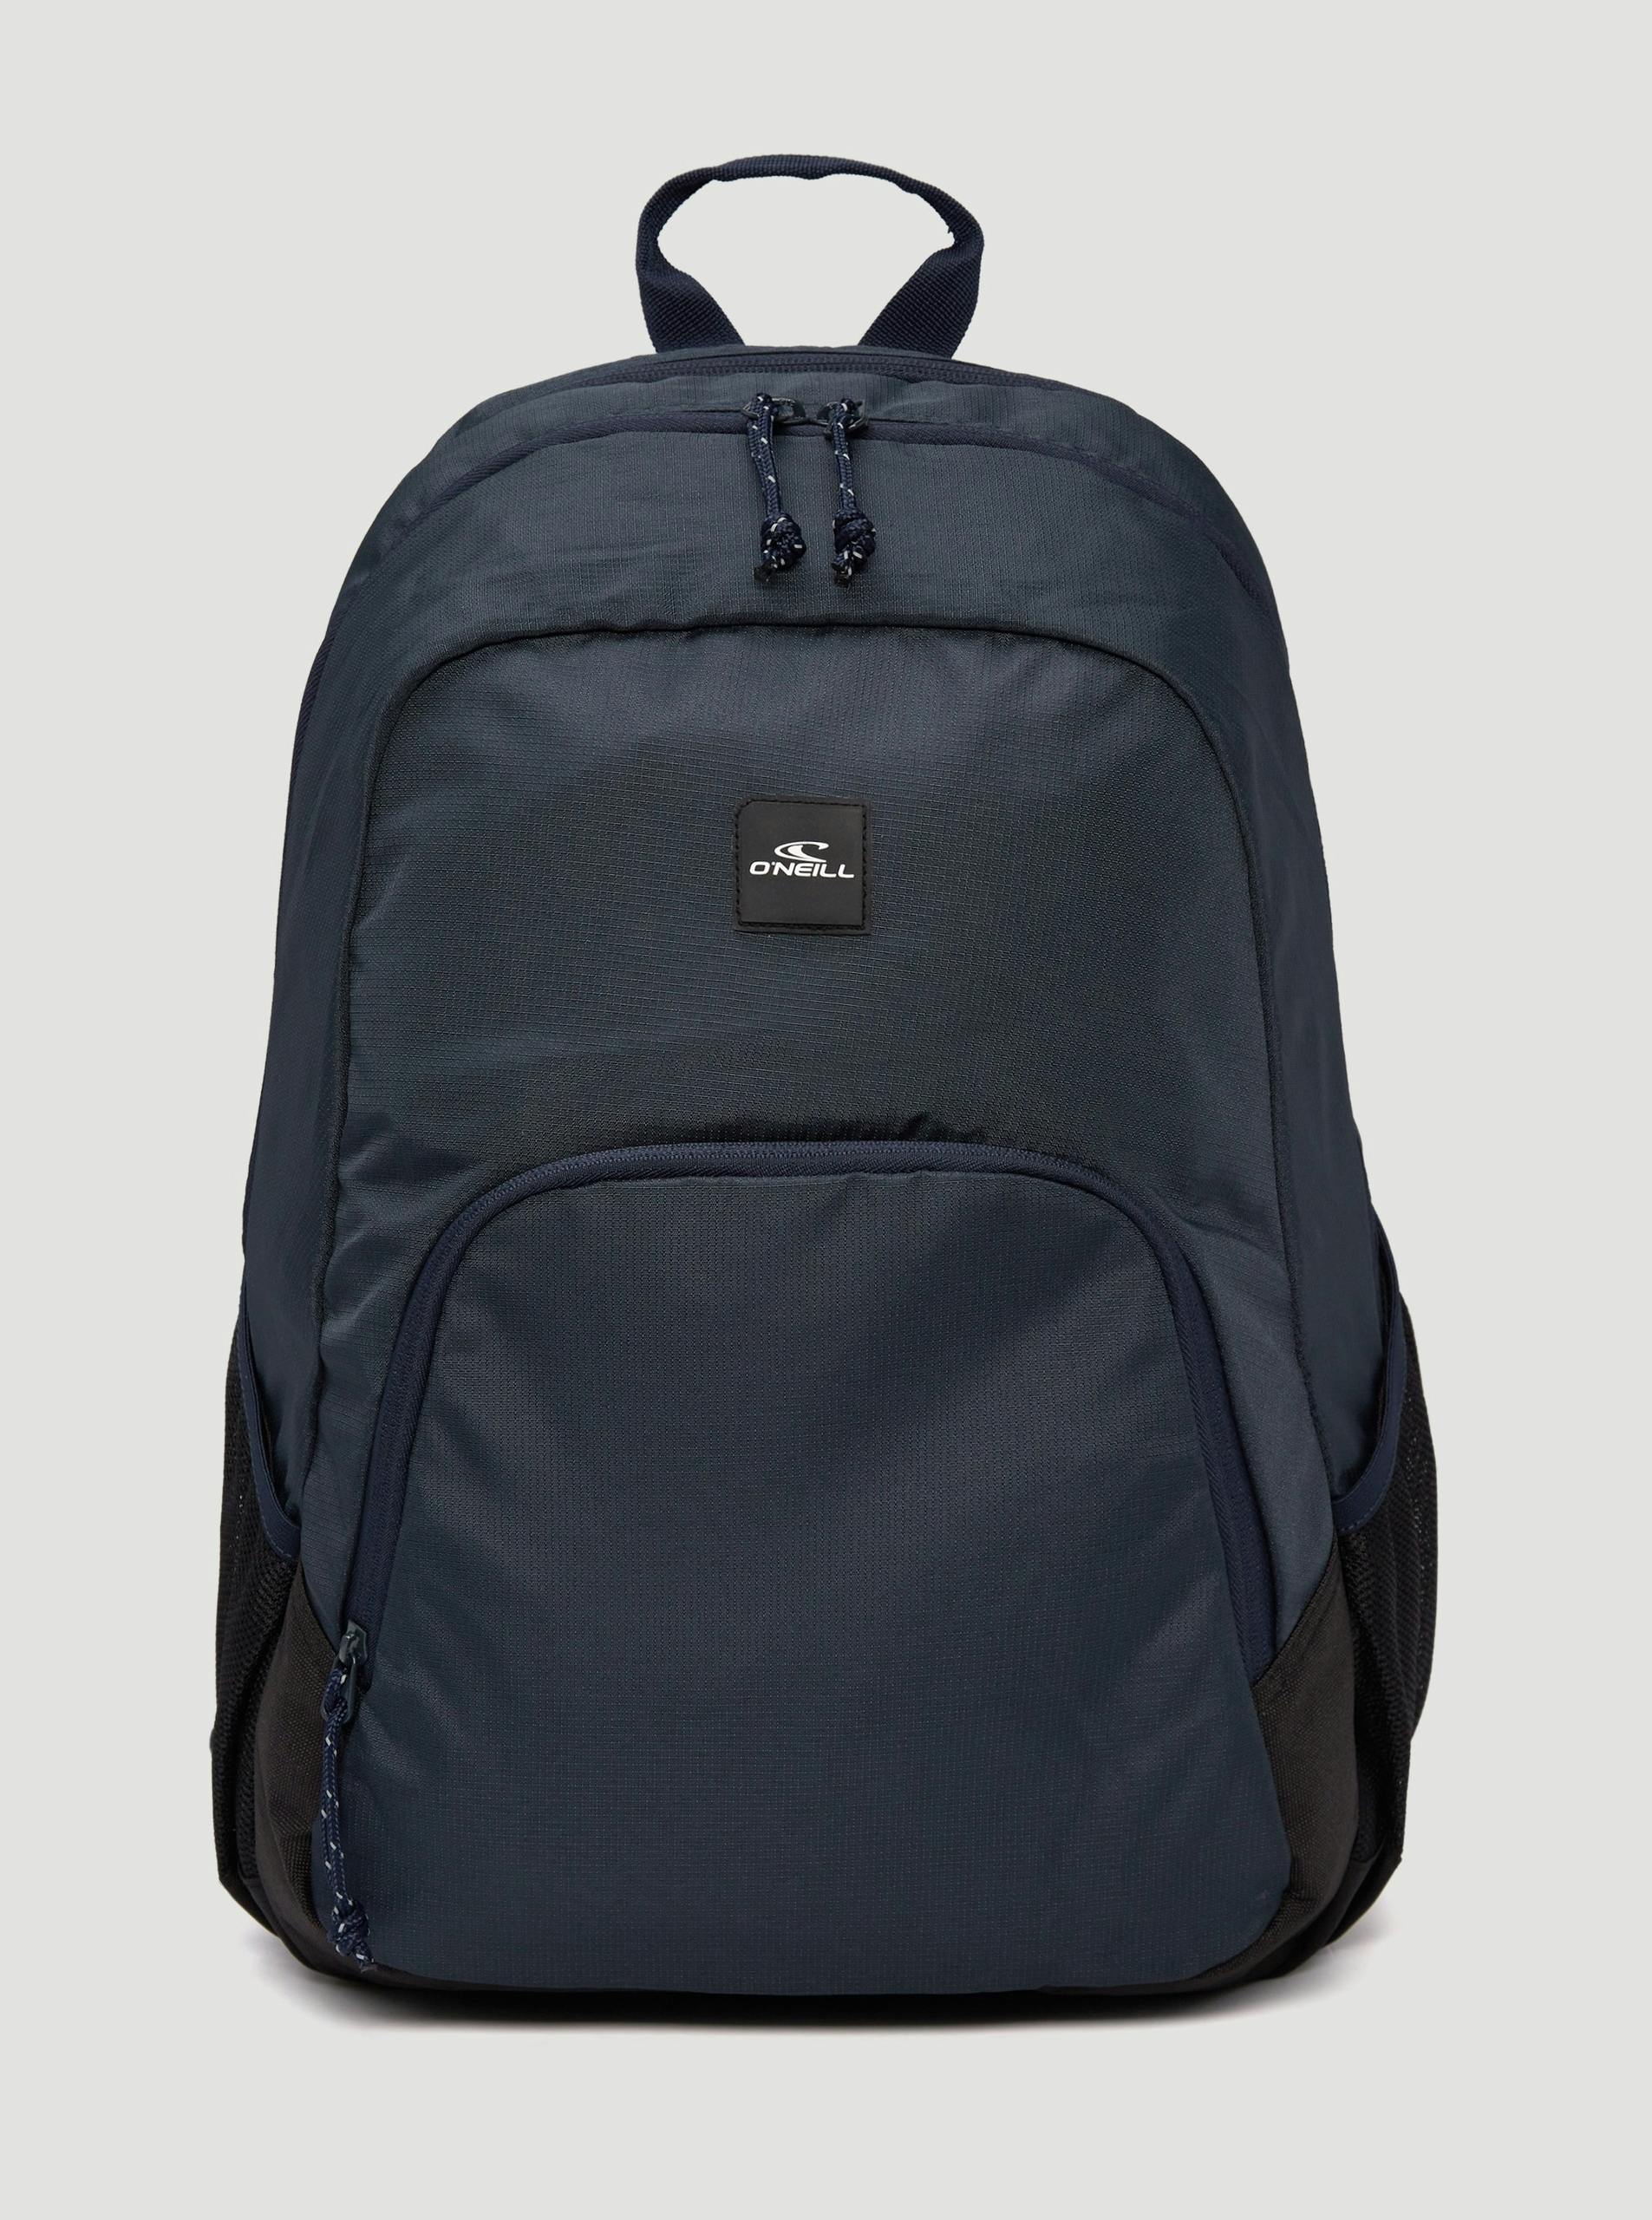 O'neill Rugzak Wedge Backpack Outer Space